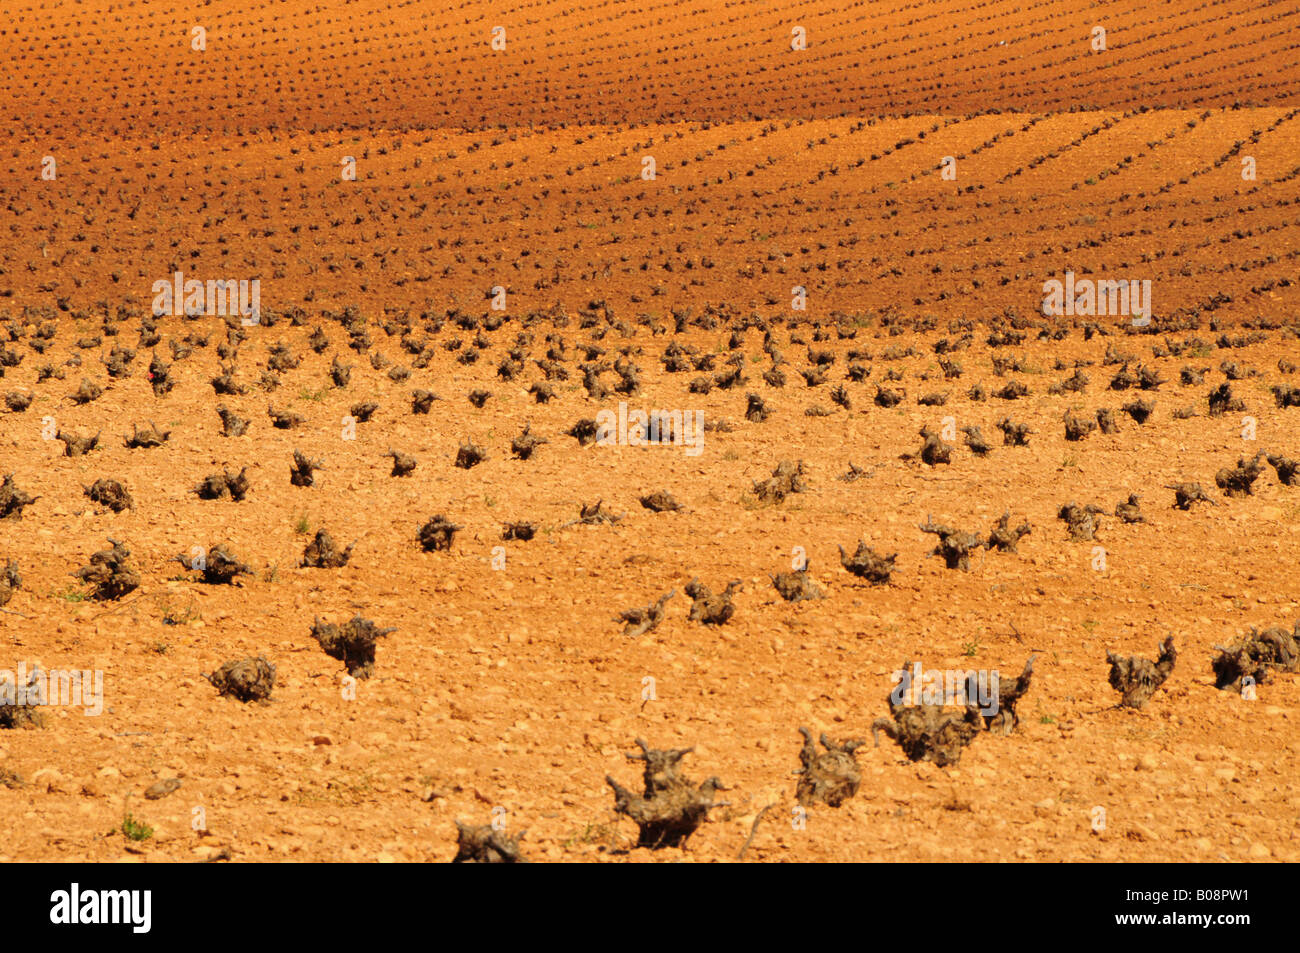 Arid agricultural landscape near Tomelloso, Ciudad Real province, Spain Stock Photo